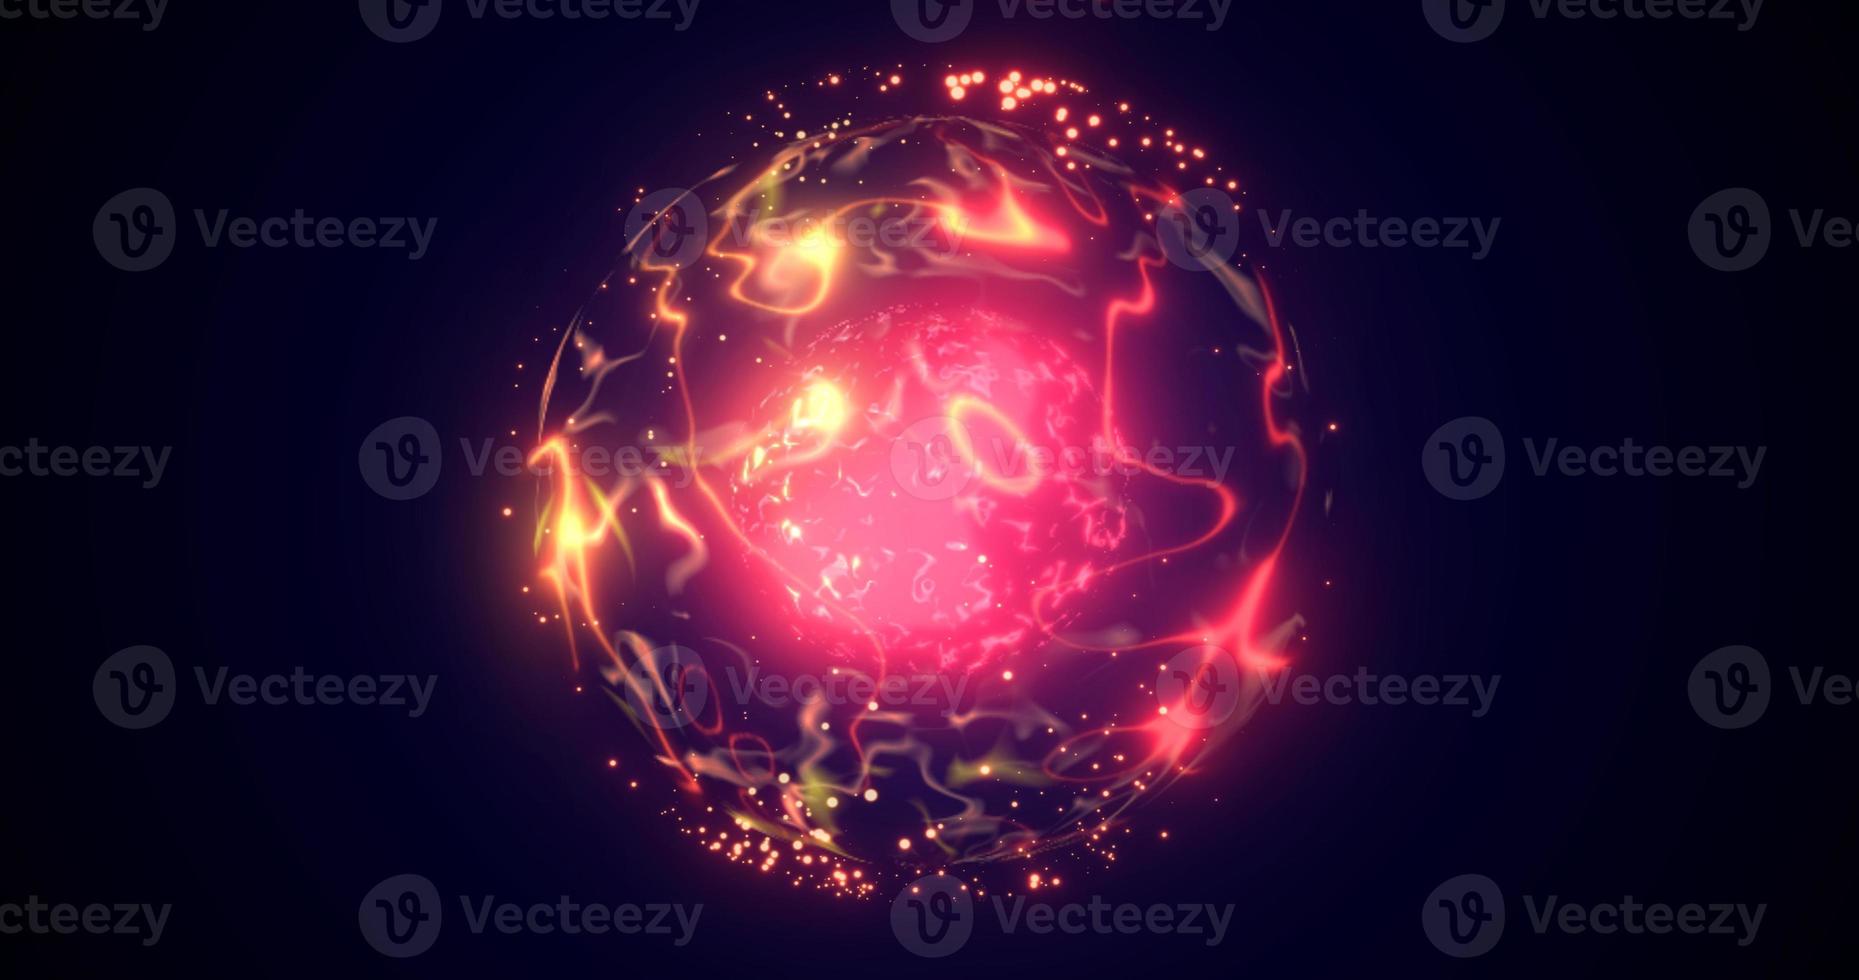 A round planet with a molten core in the center in space, a star sphere with a fiery magical luminous energy field from plasma. Abstract background photo